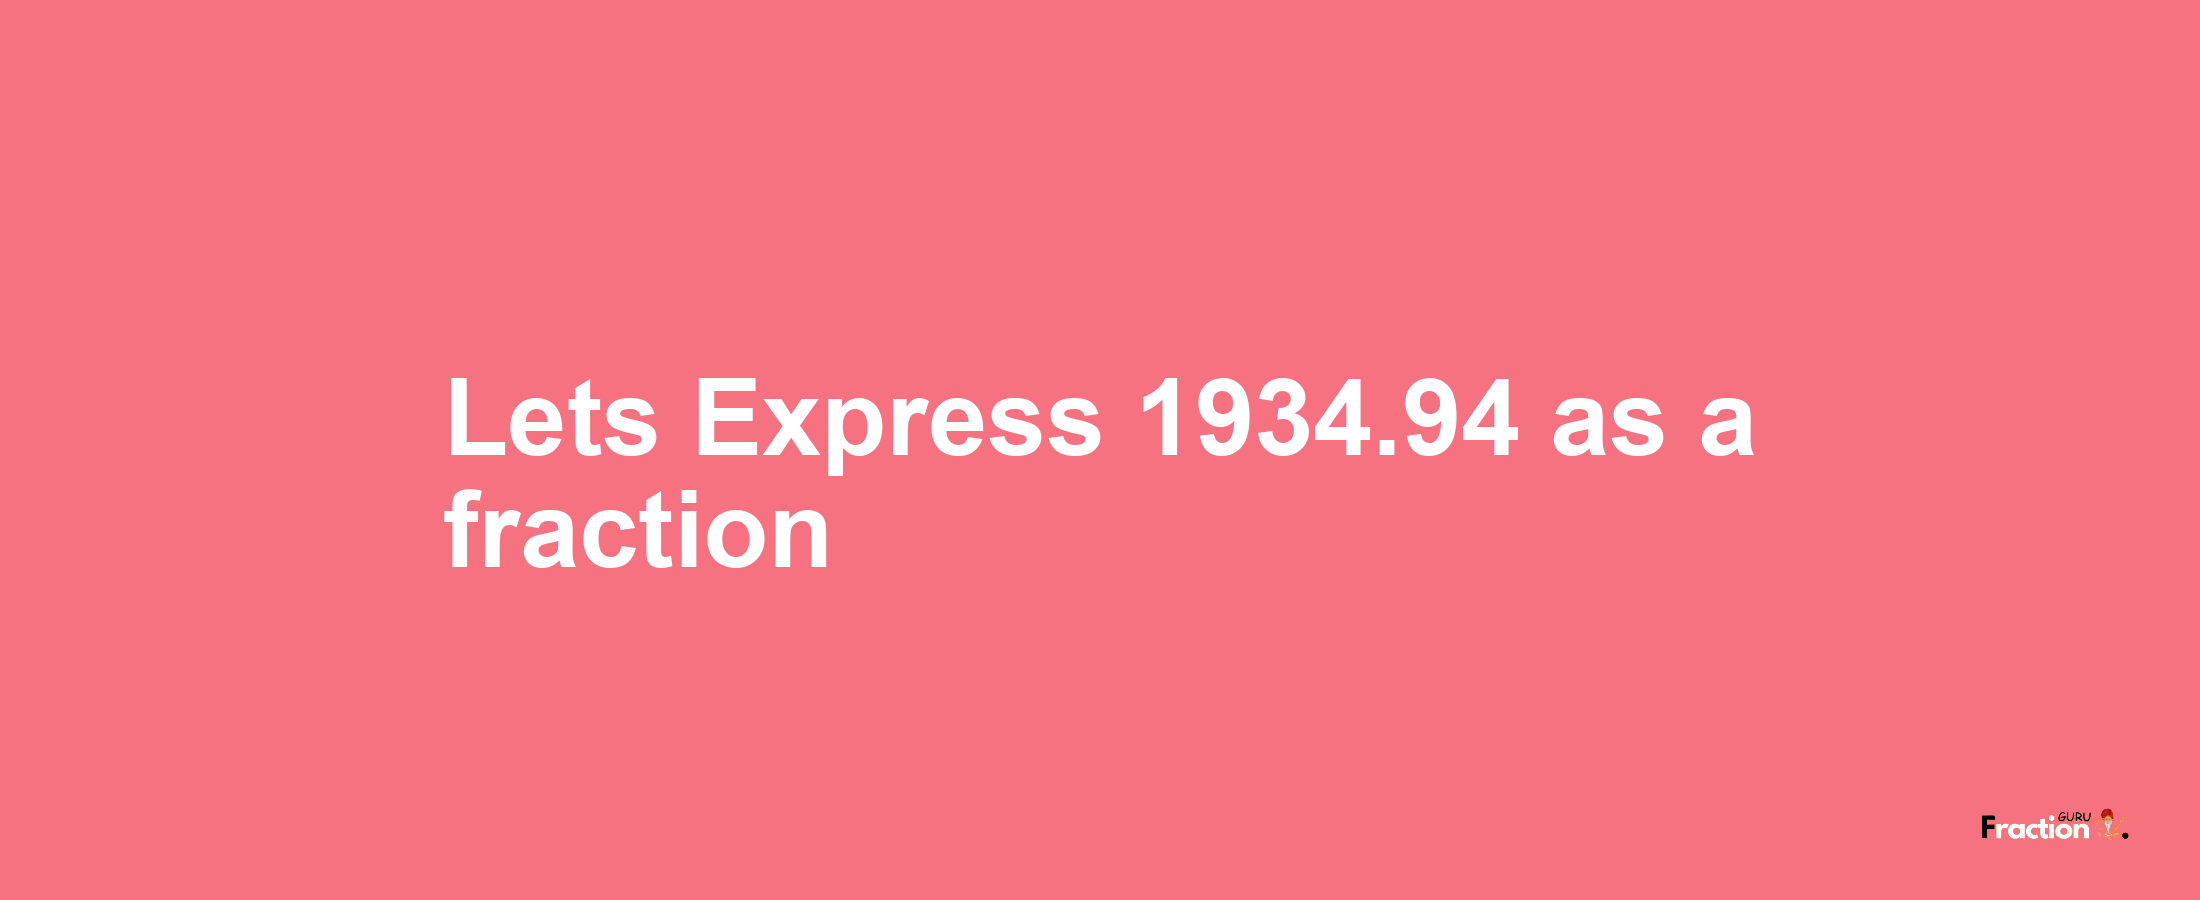 Lets Express 1934.94 as afraction